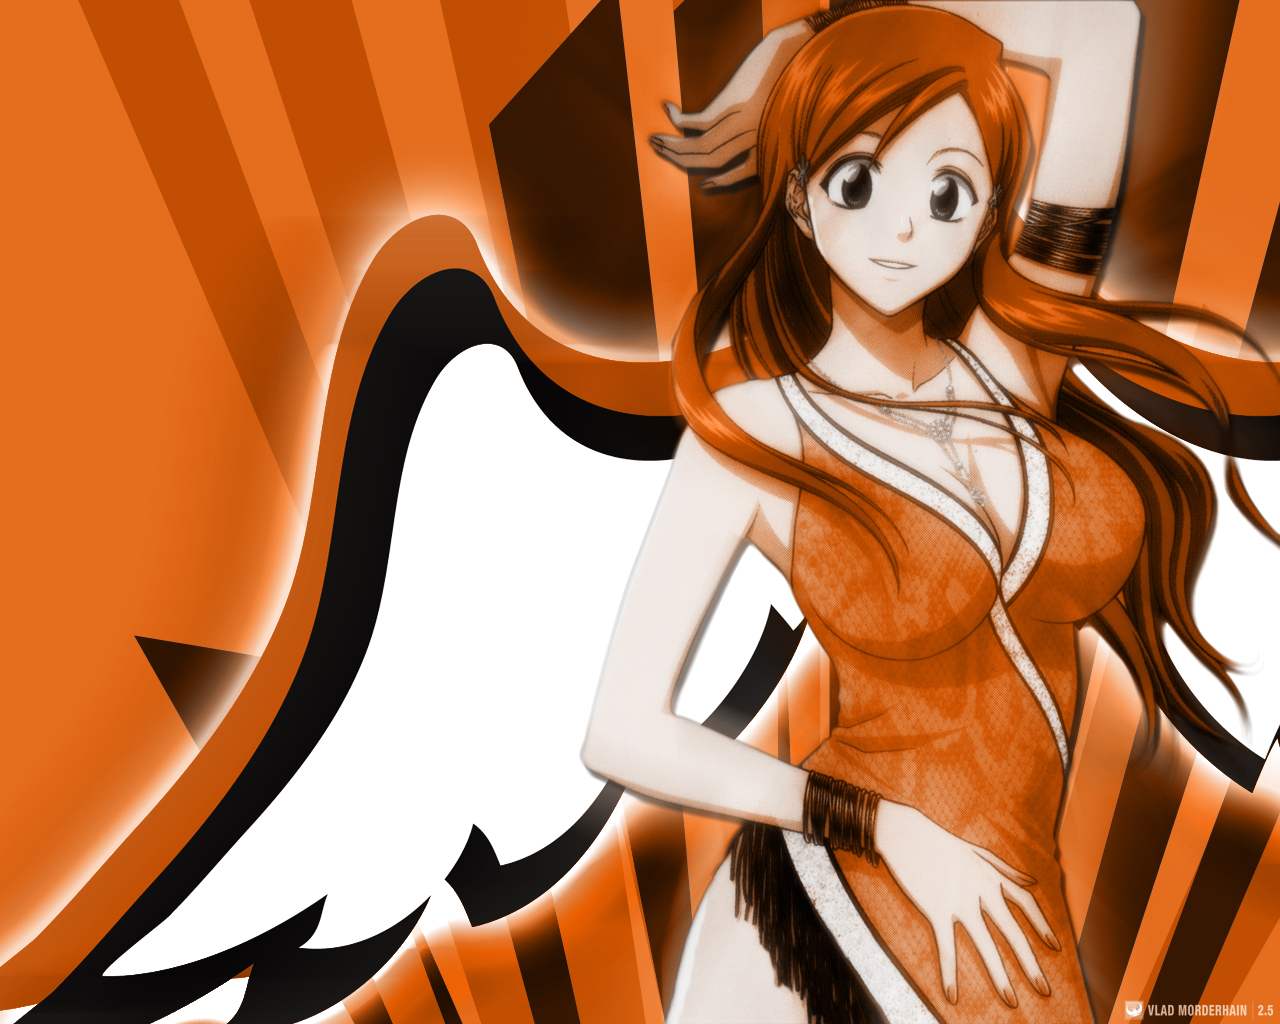 The Bleach Anime Wallpaper Titled Orihime Inoue